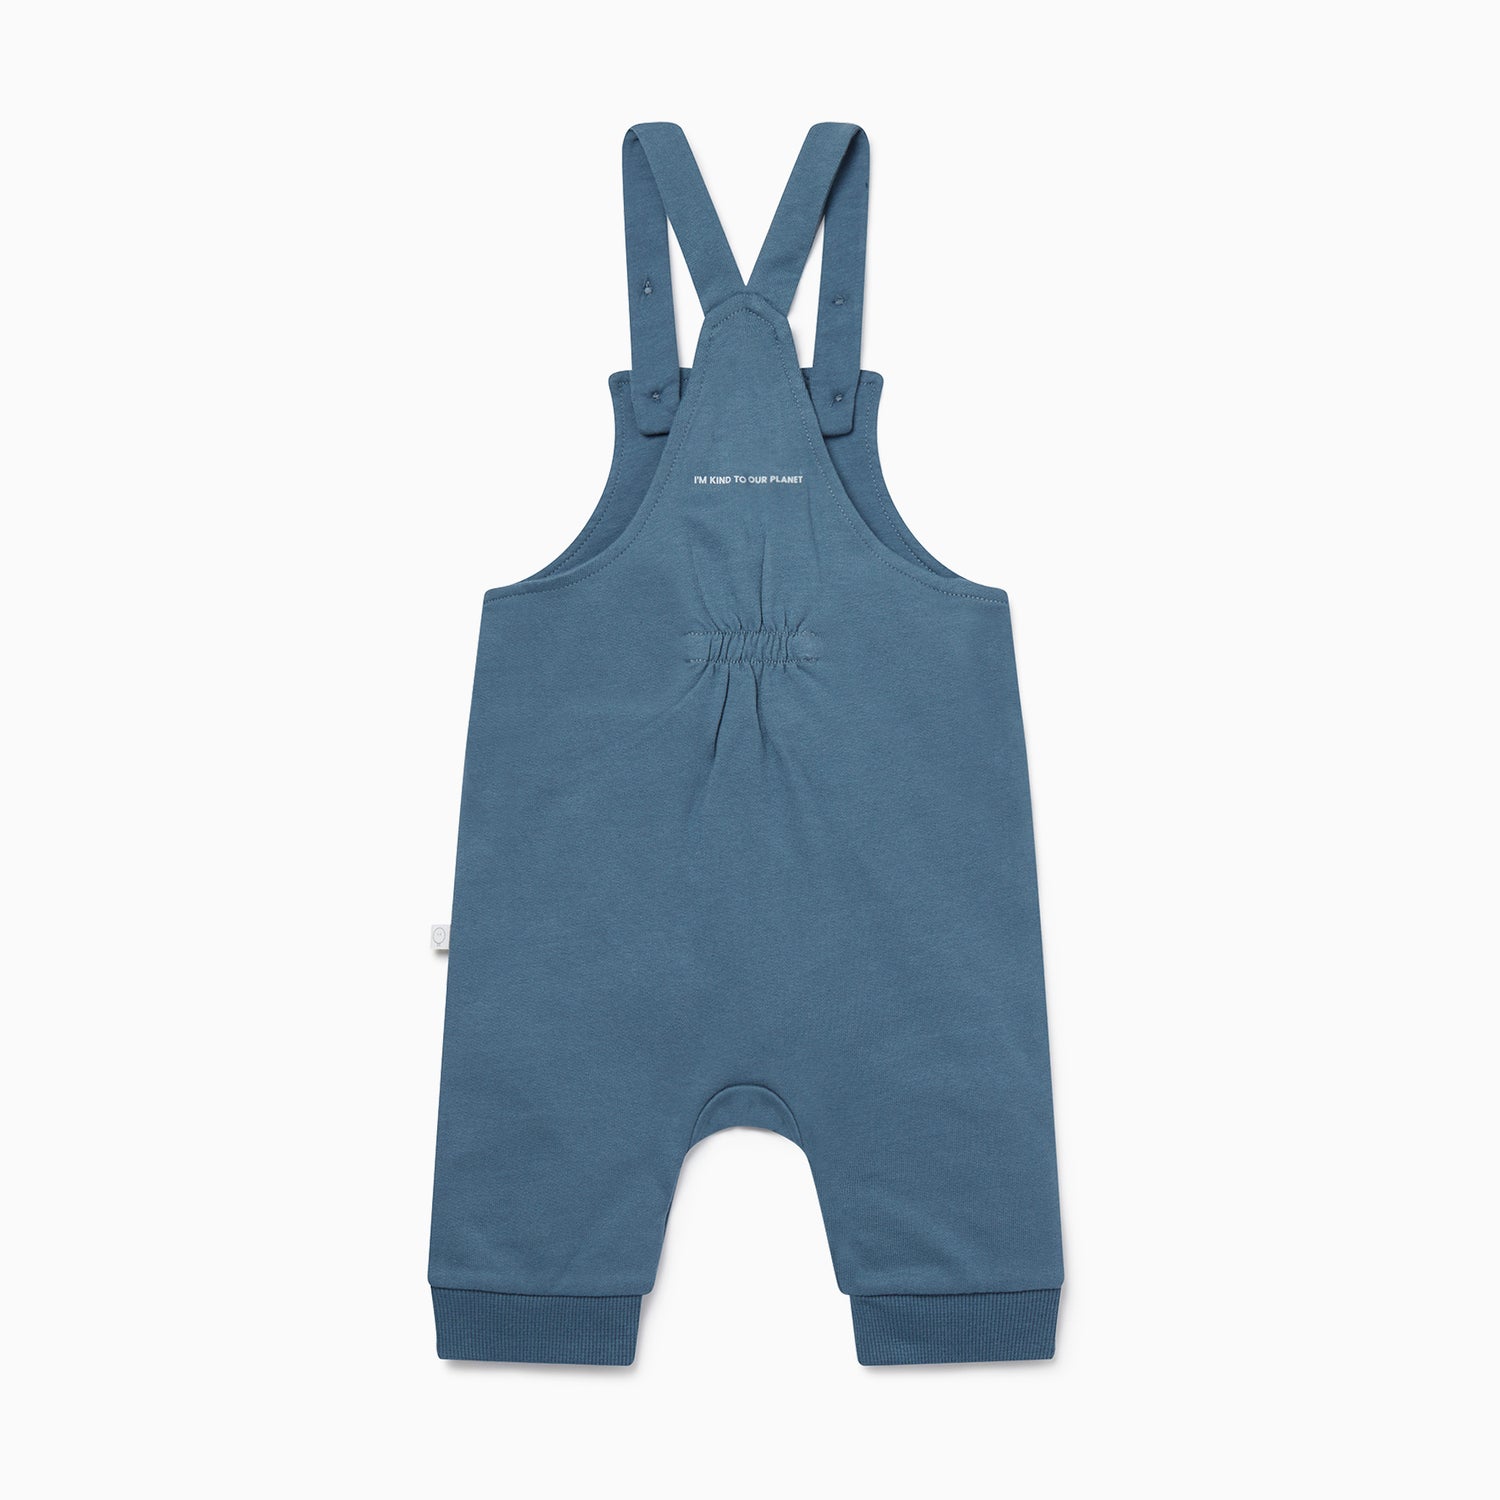 Back of teal dungarees